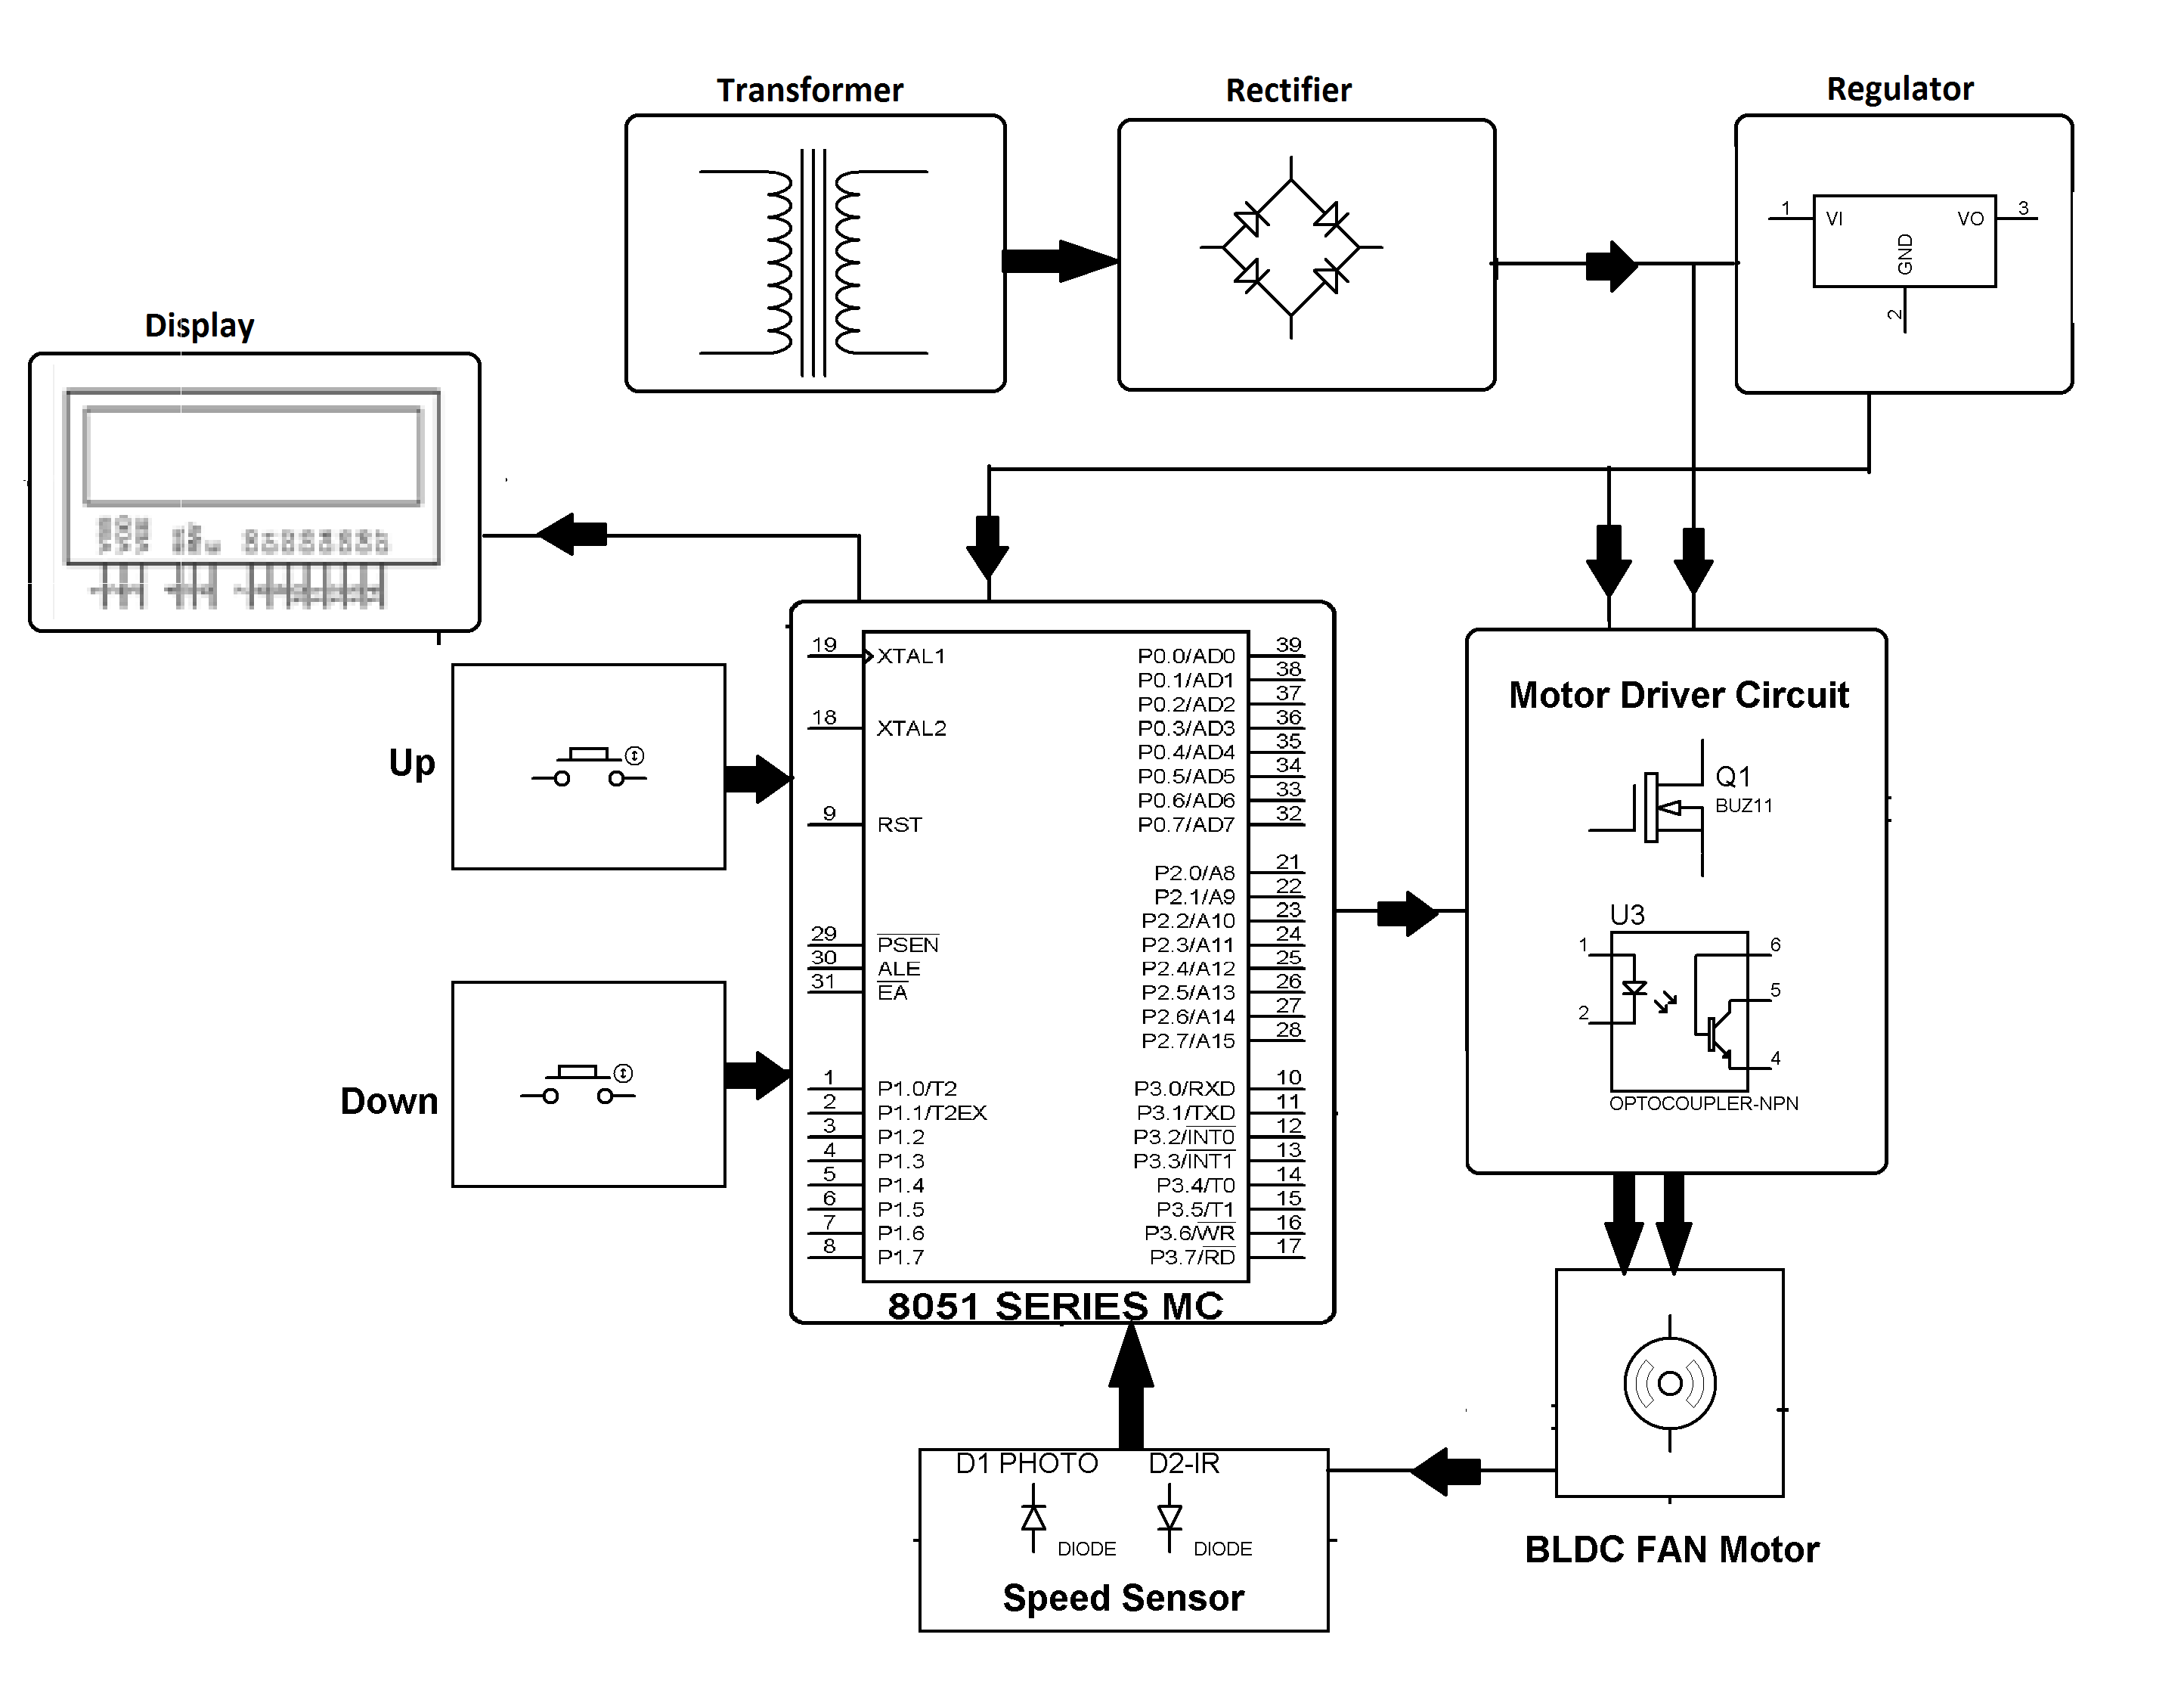 RPM Display For BLDC Motor With Speed Controller fuzzy logic block diagram 